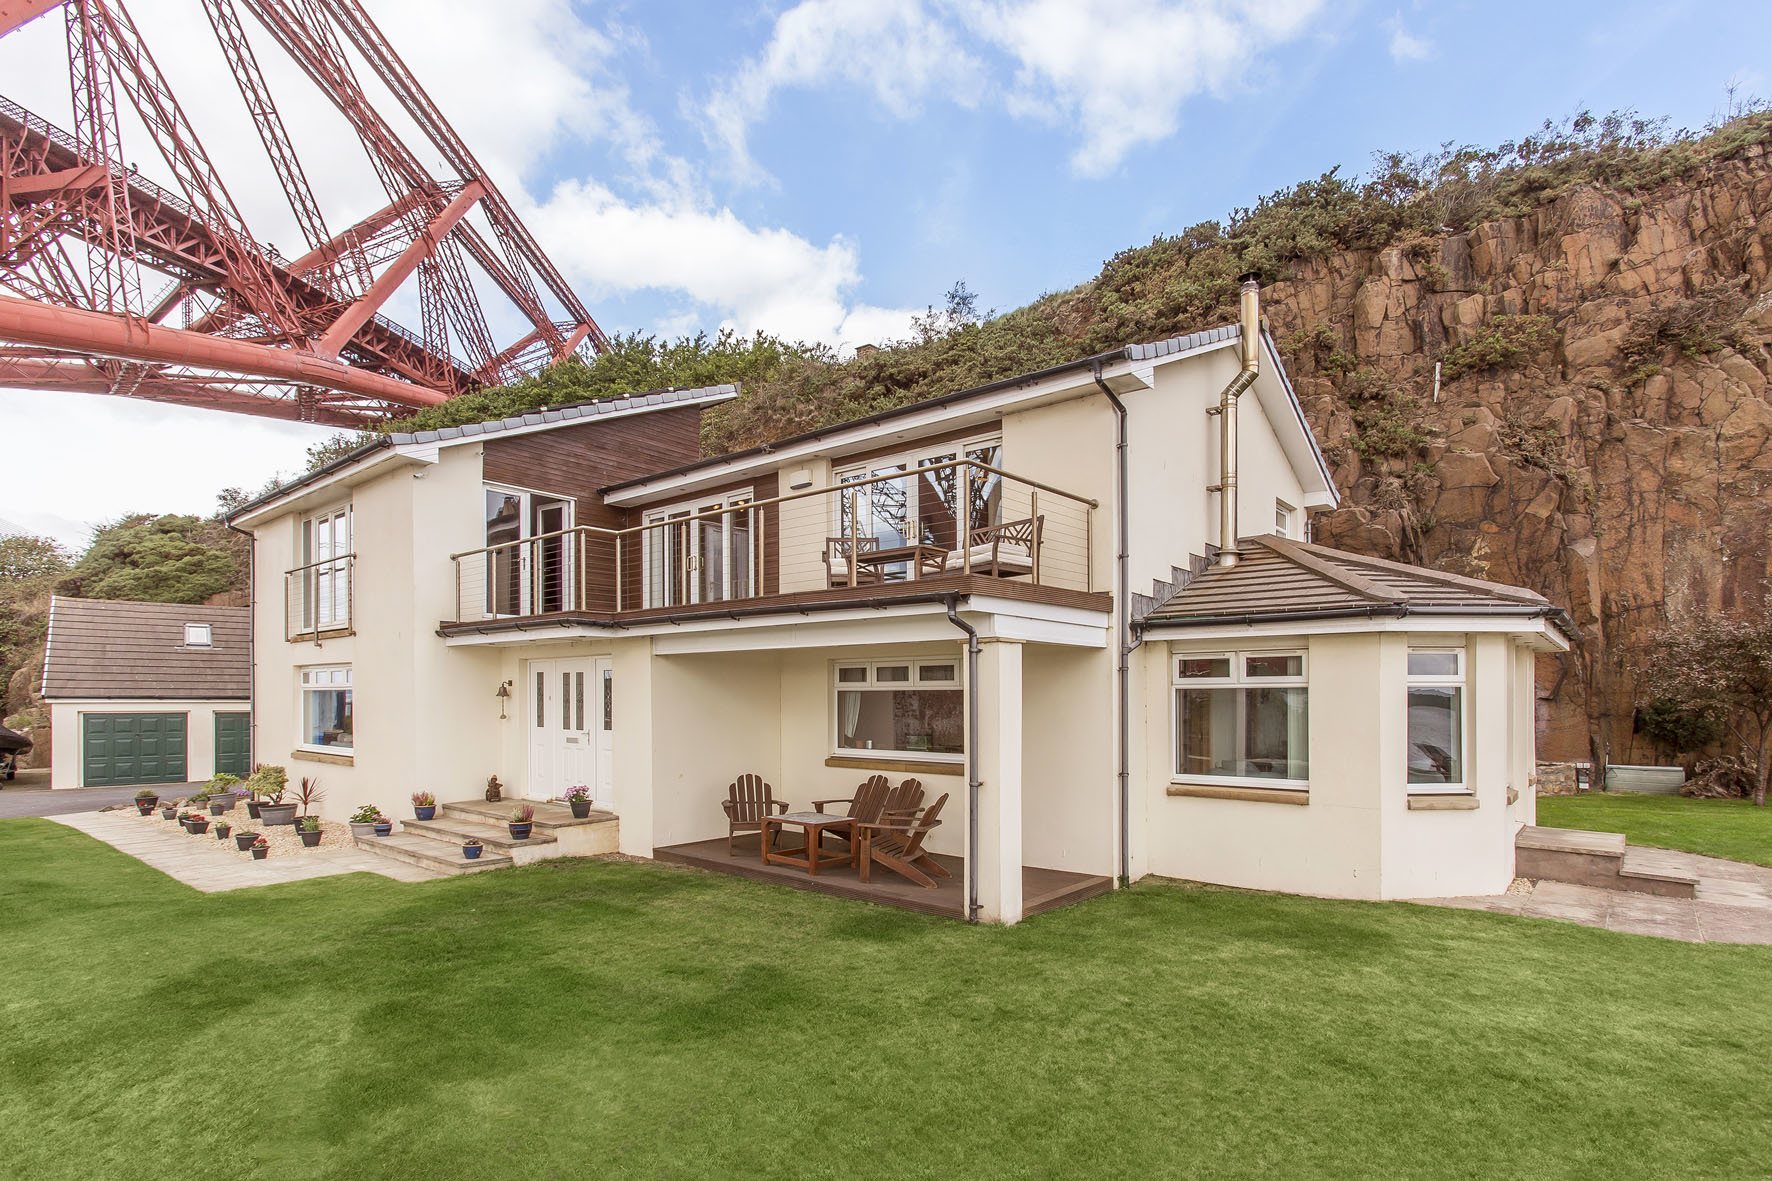 The property by the Forth Bridge is listed for just under £1m at offers over £925,000.